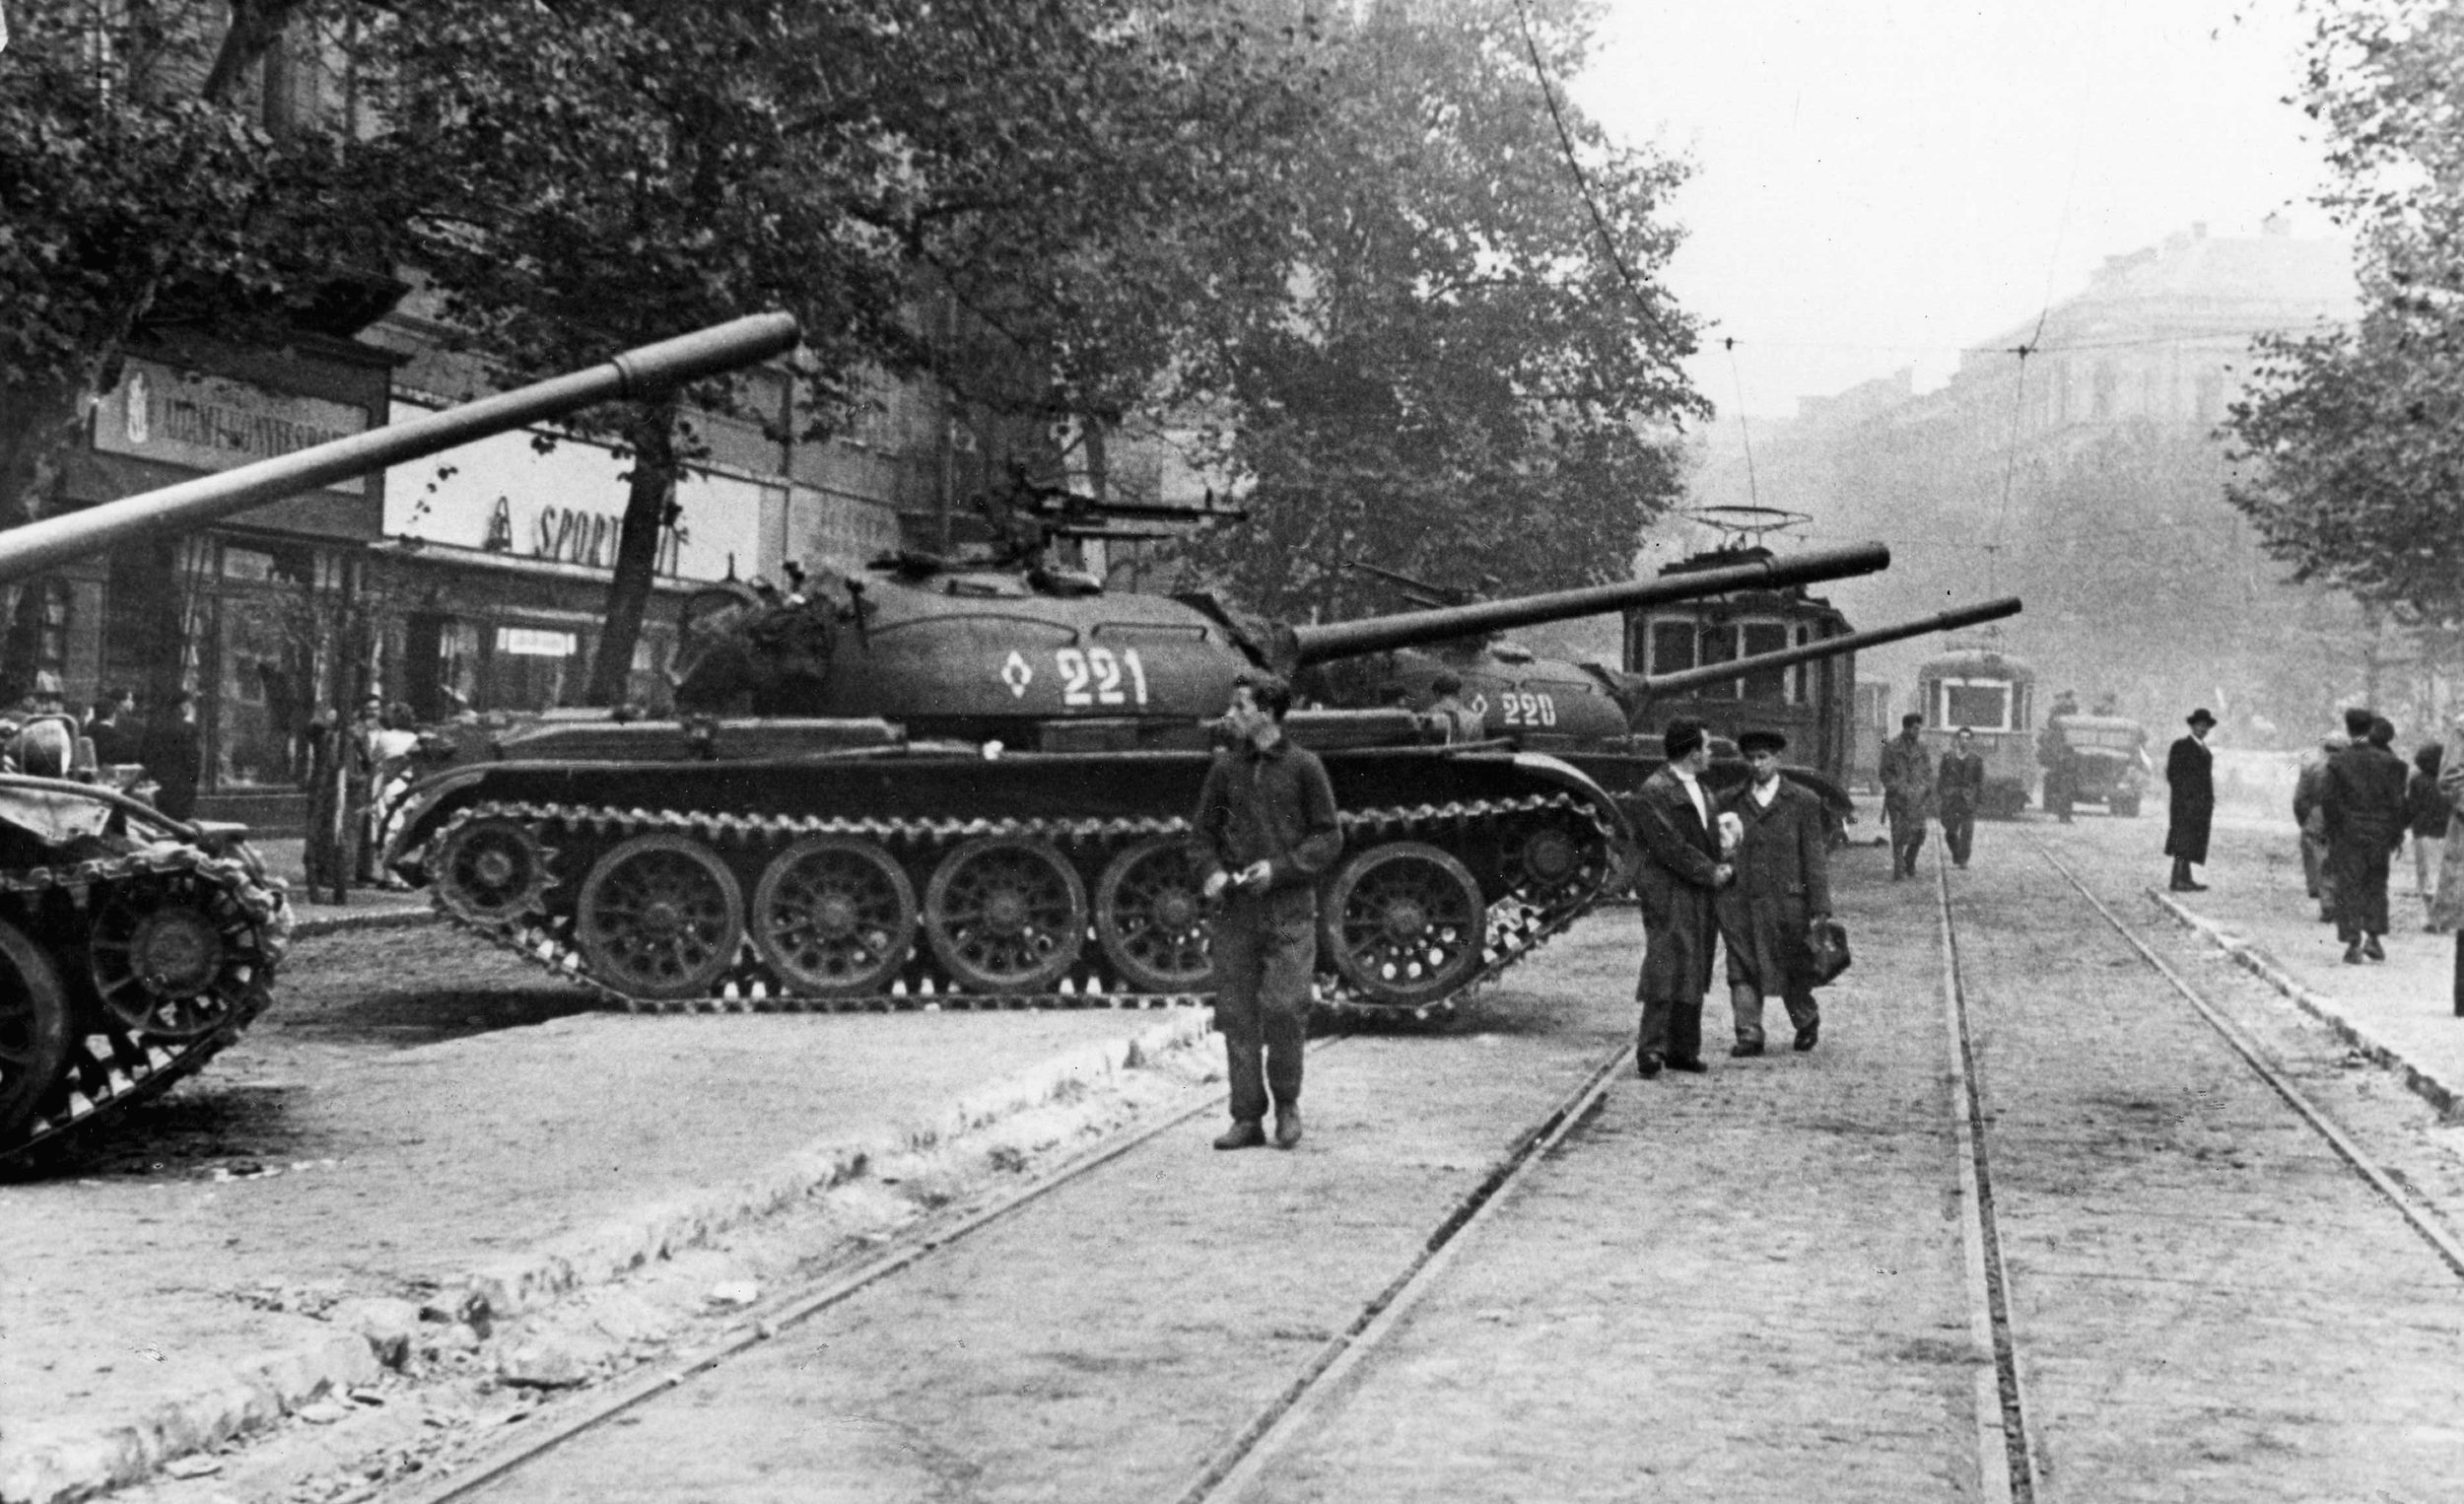 More Russian tanks stand ready for action in Budapest on October 30,  1956. Citizens look on warily.